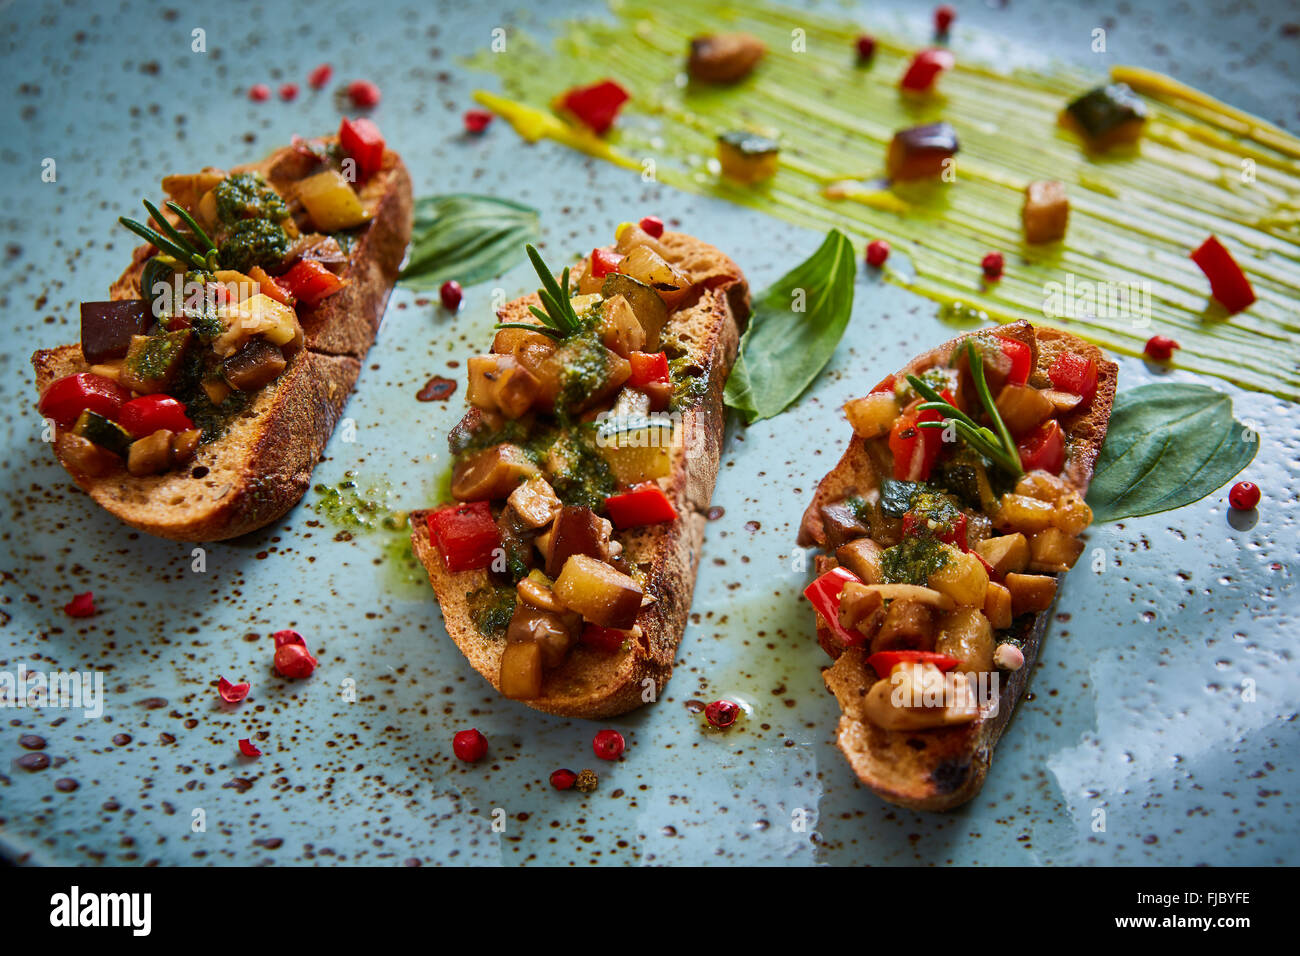 Vegan food: bruschetta with bell pepper, tomatoes, arugula, thyme and basil Stock Photo